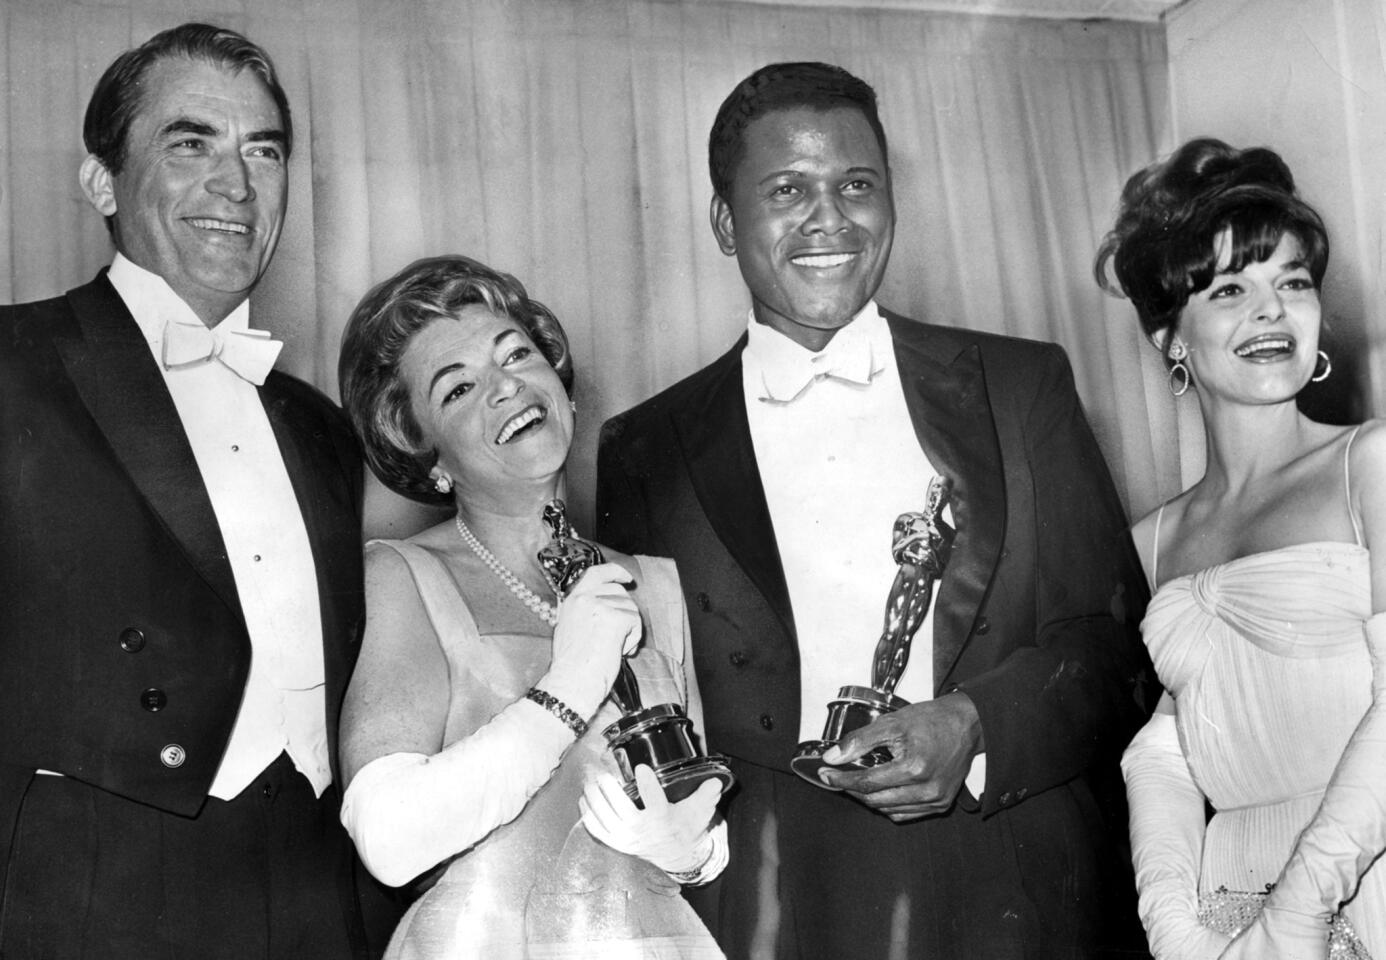 Sidney Poitier becomes first African American to win best actor Oscar